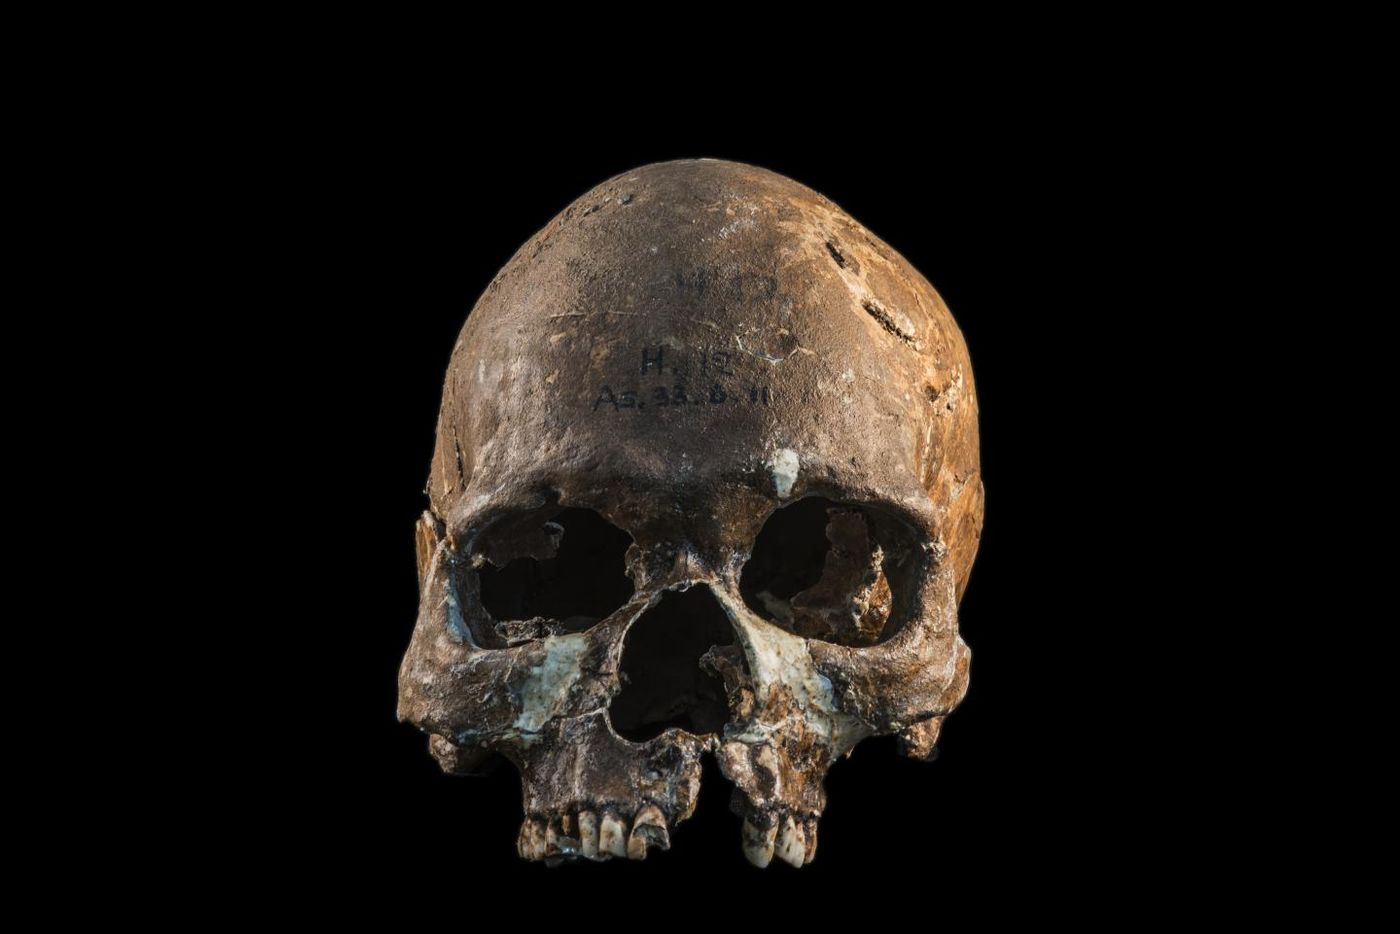 Skull from a Hòabìnhian person from Gua Cha archaeological site, Malaysian Peninsula. / Credit: Fabio Lahr